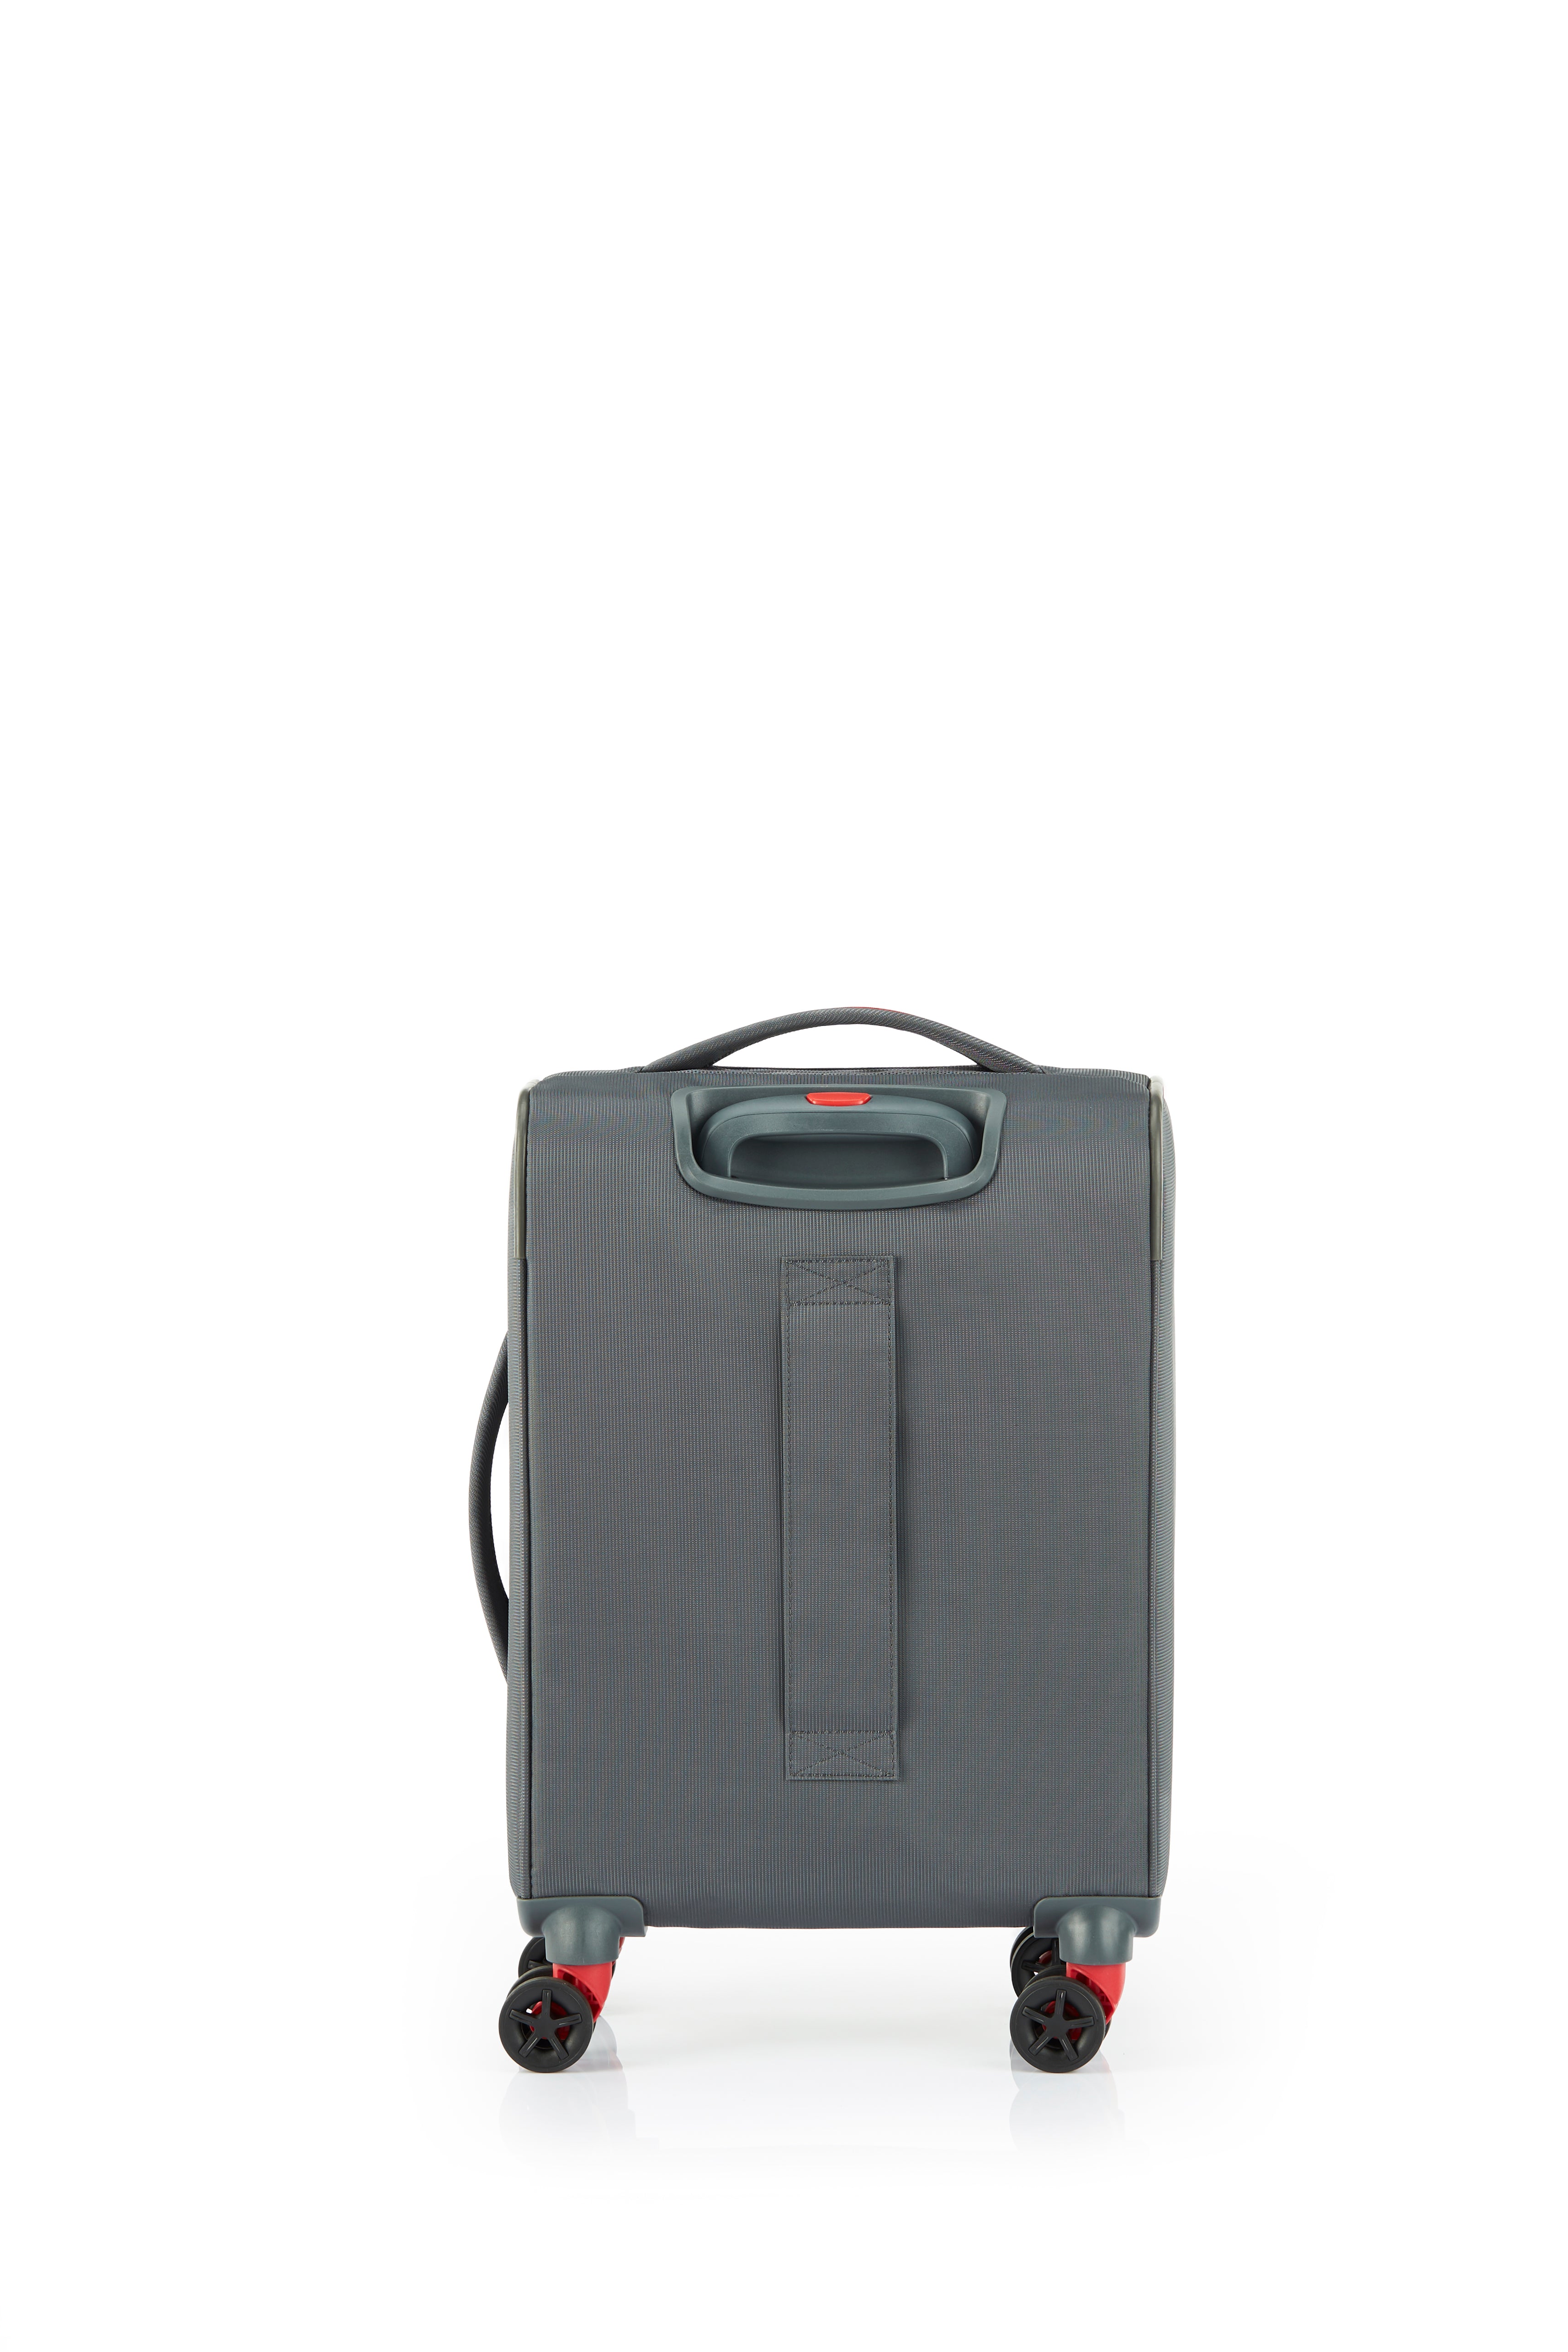 American Tourister - Applite ECO 55cm Small Suitcase - Grey/Red-5